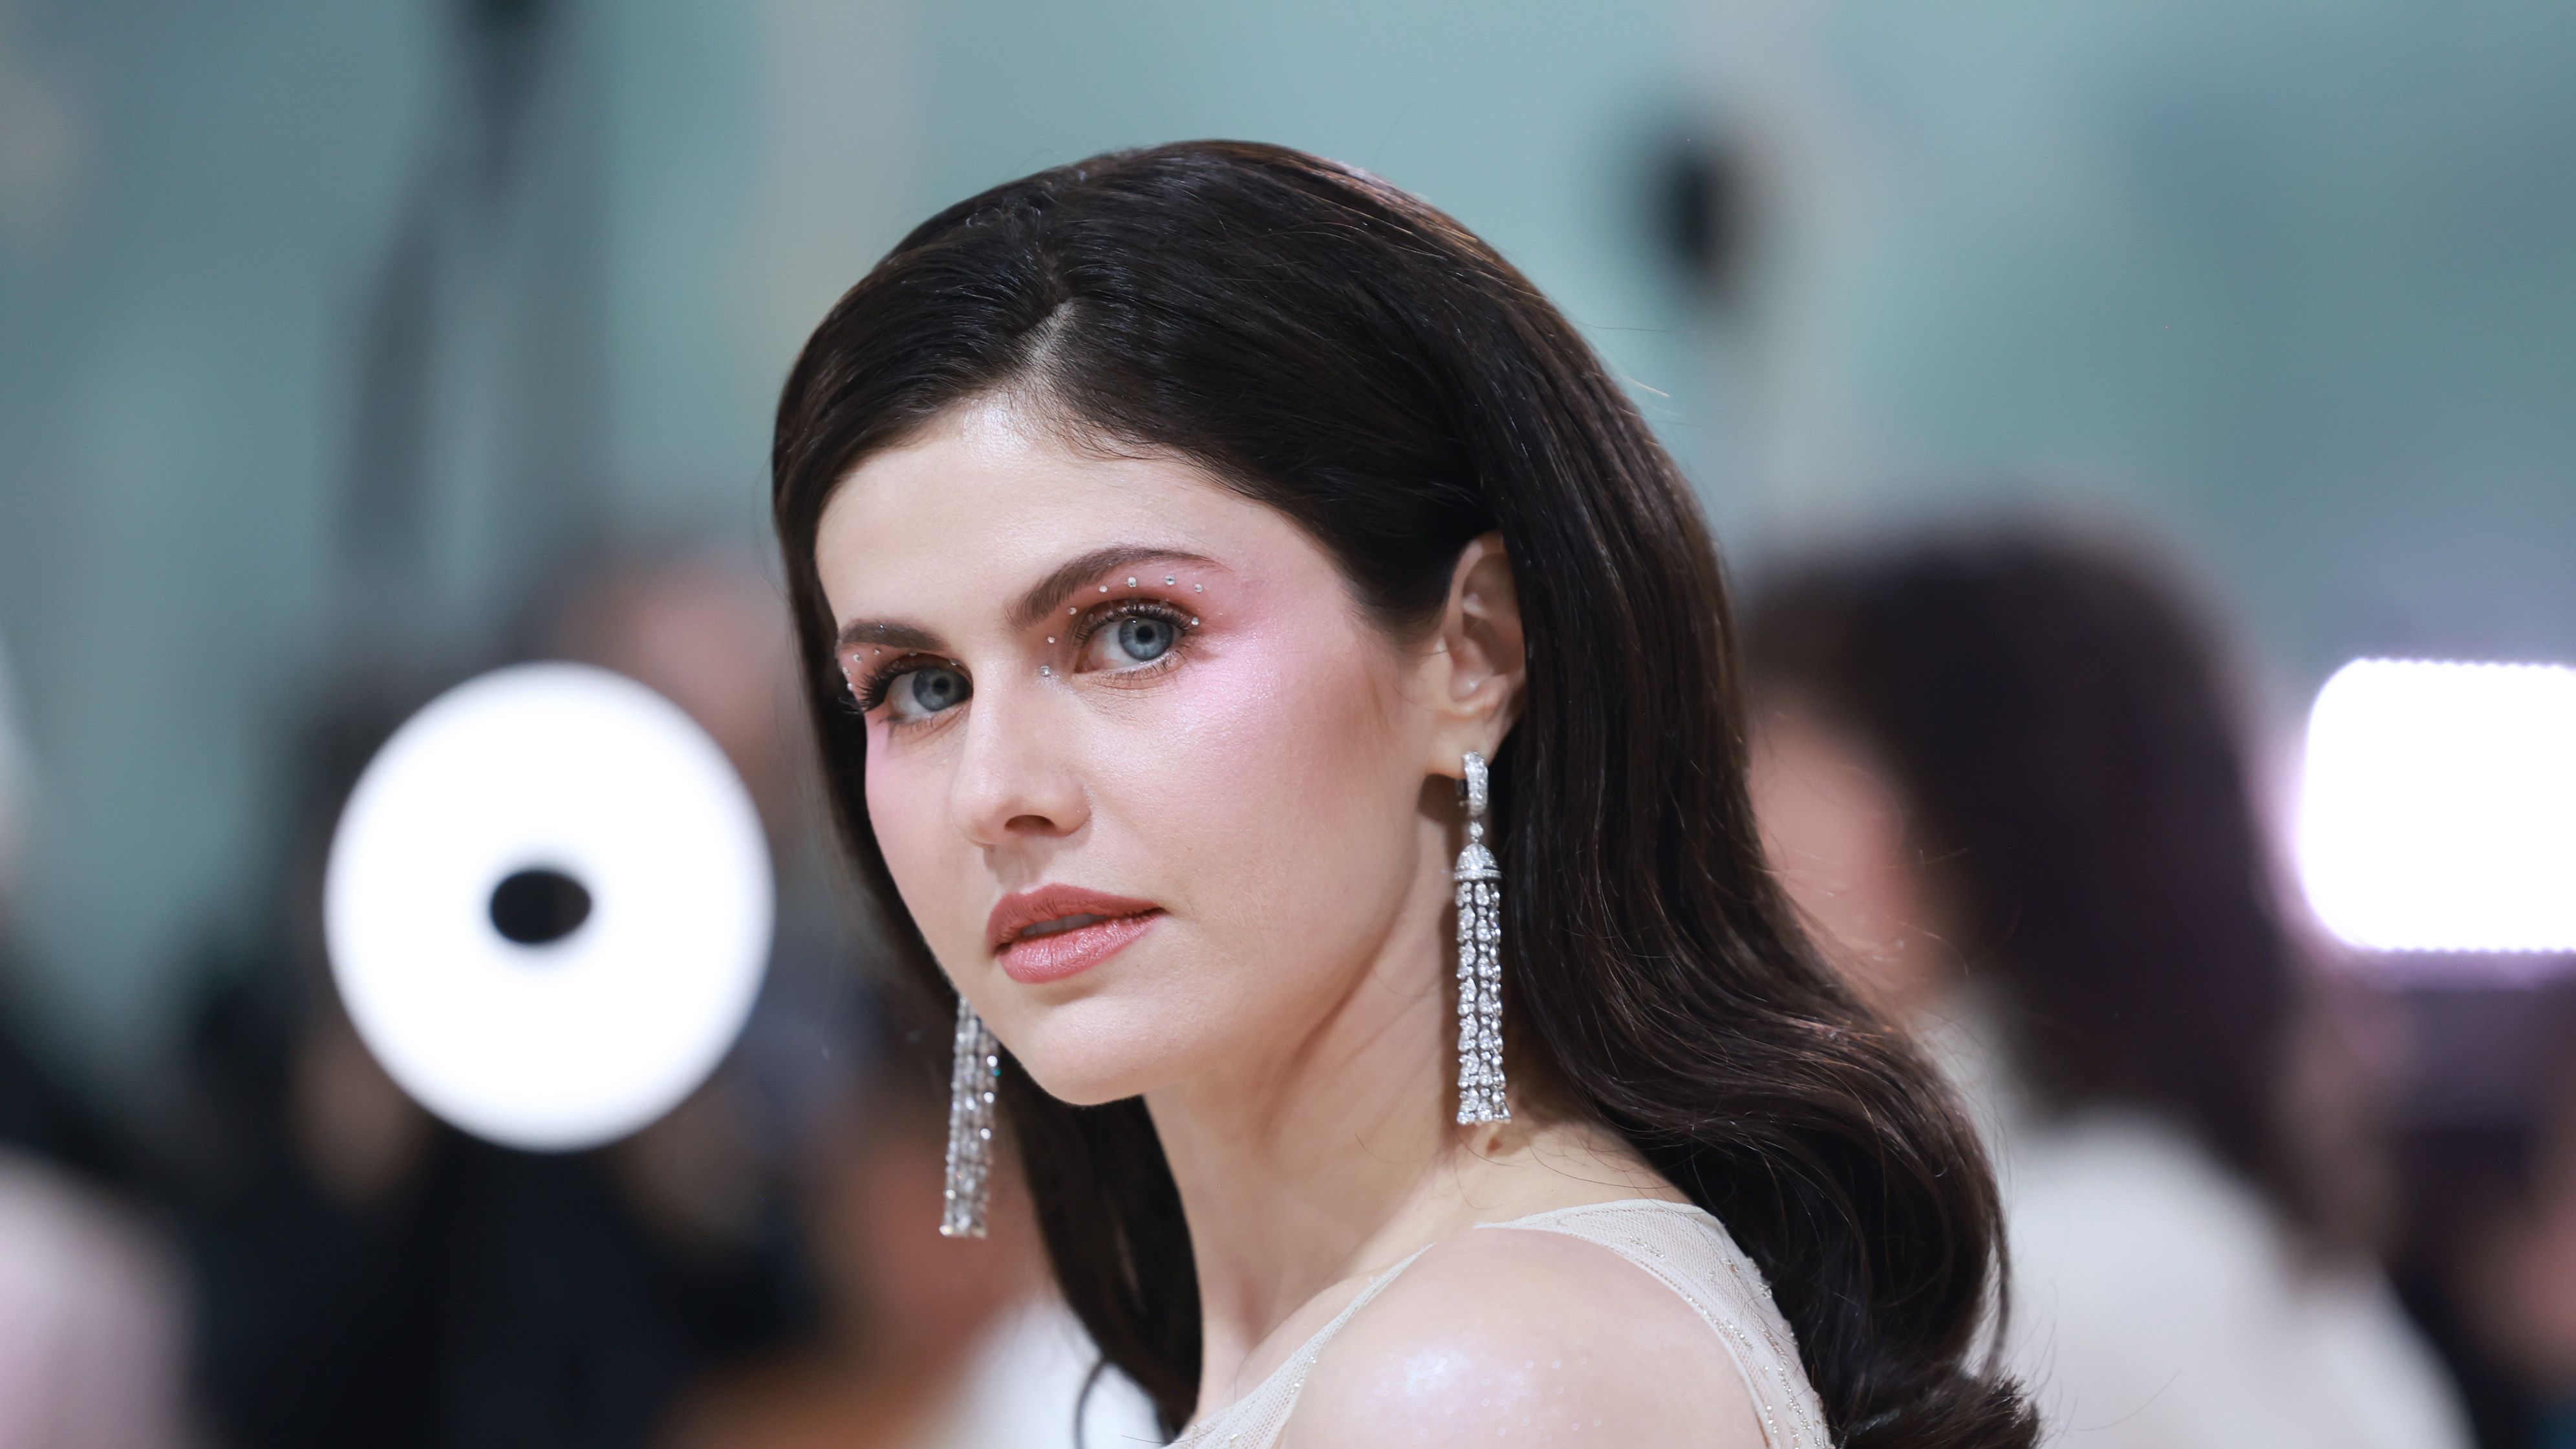 Nudist Lifestyle Gallery - Alexandra Daddario Posed In The Nude On IG, And Fans Went Bonkers